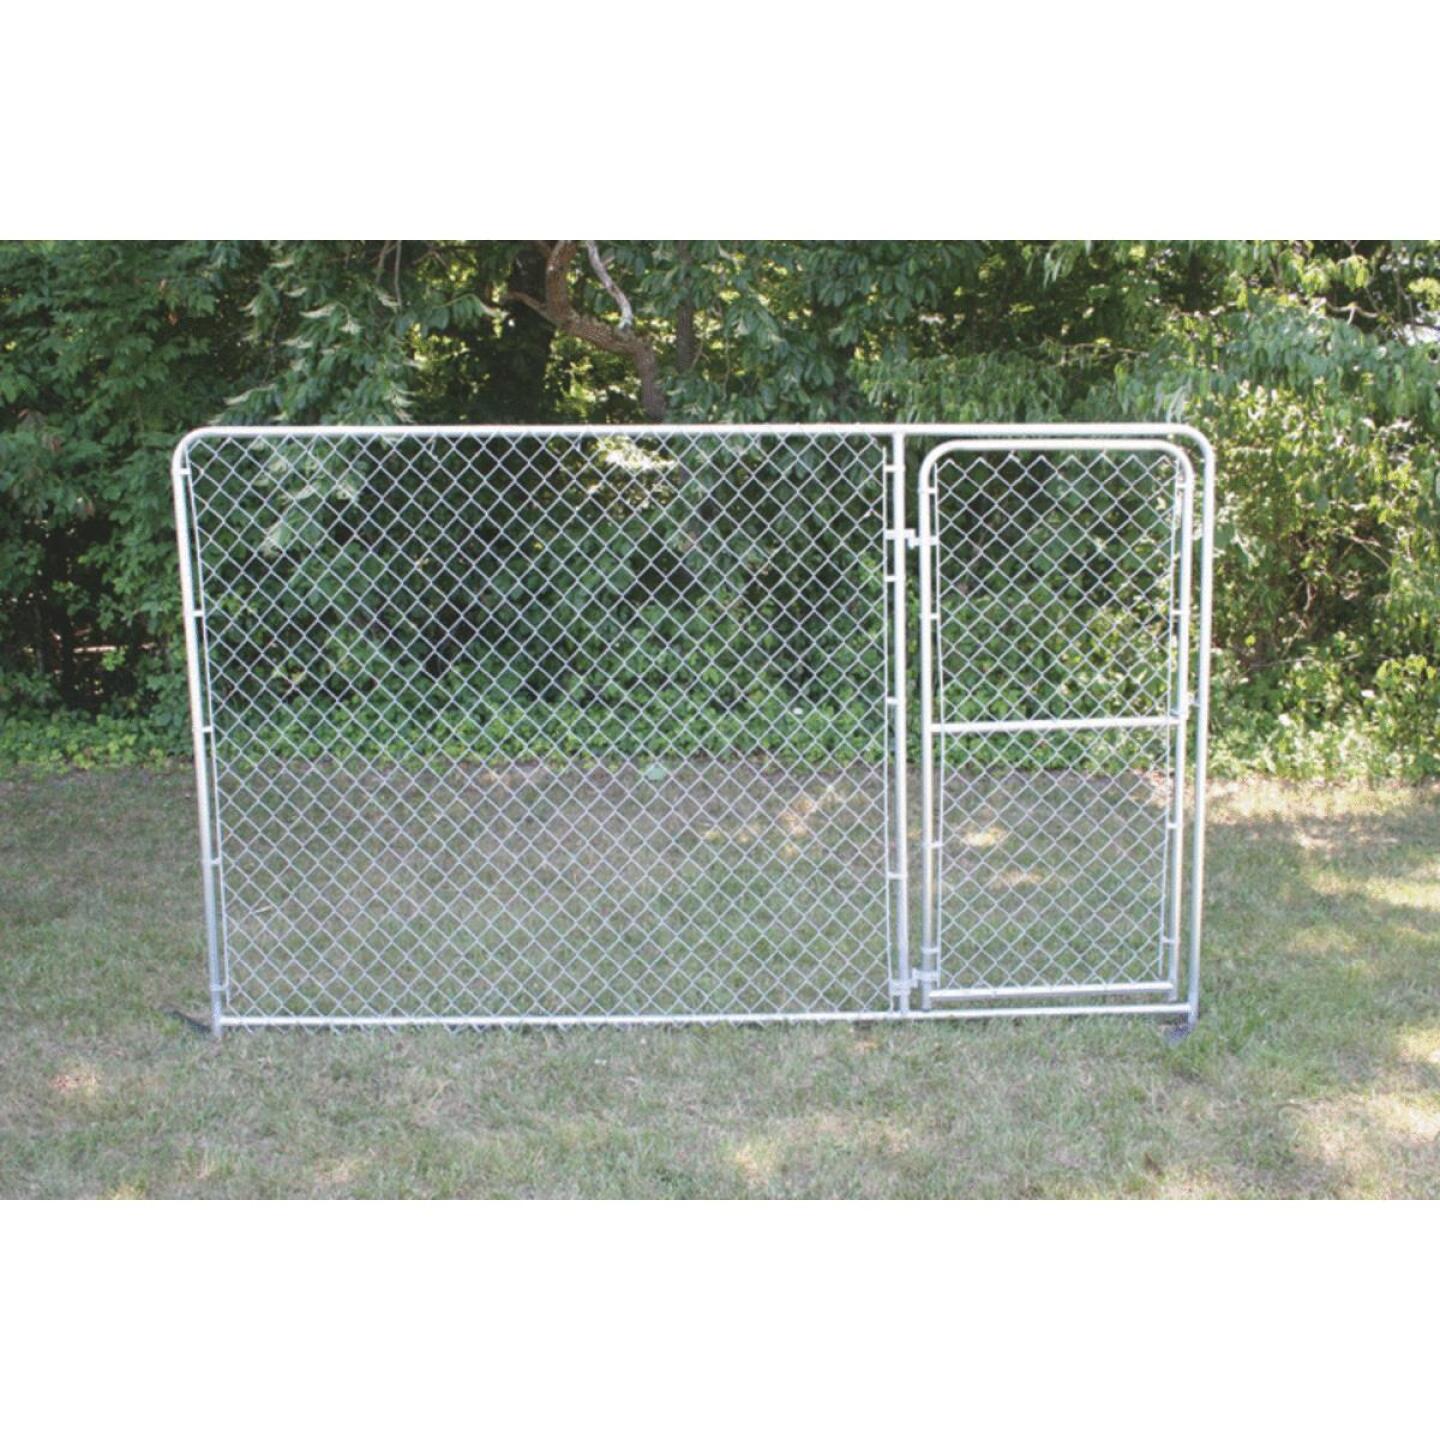 Fence Master, Fence Master Silver Series 10 Ft. W. x 6 Ft. H. Steel Kennel Panel with Door